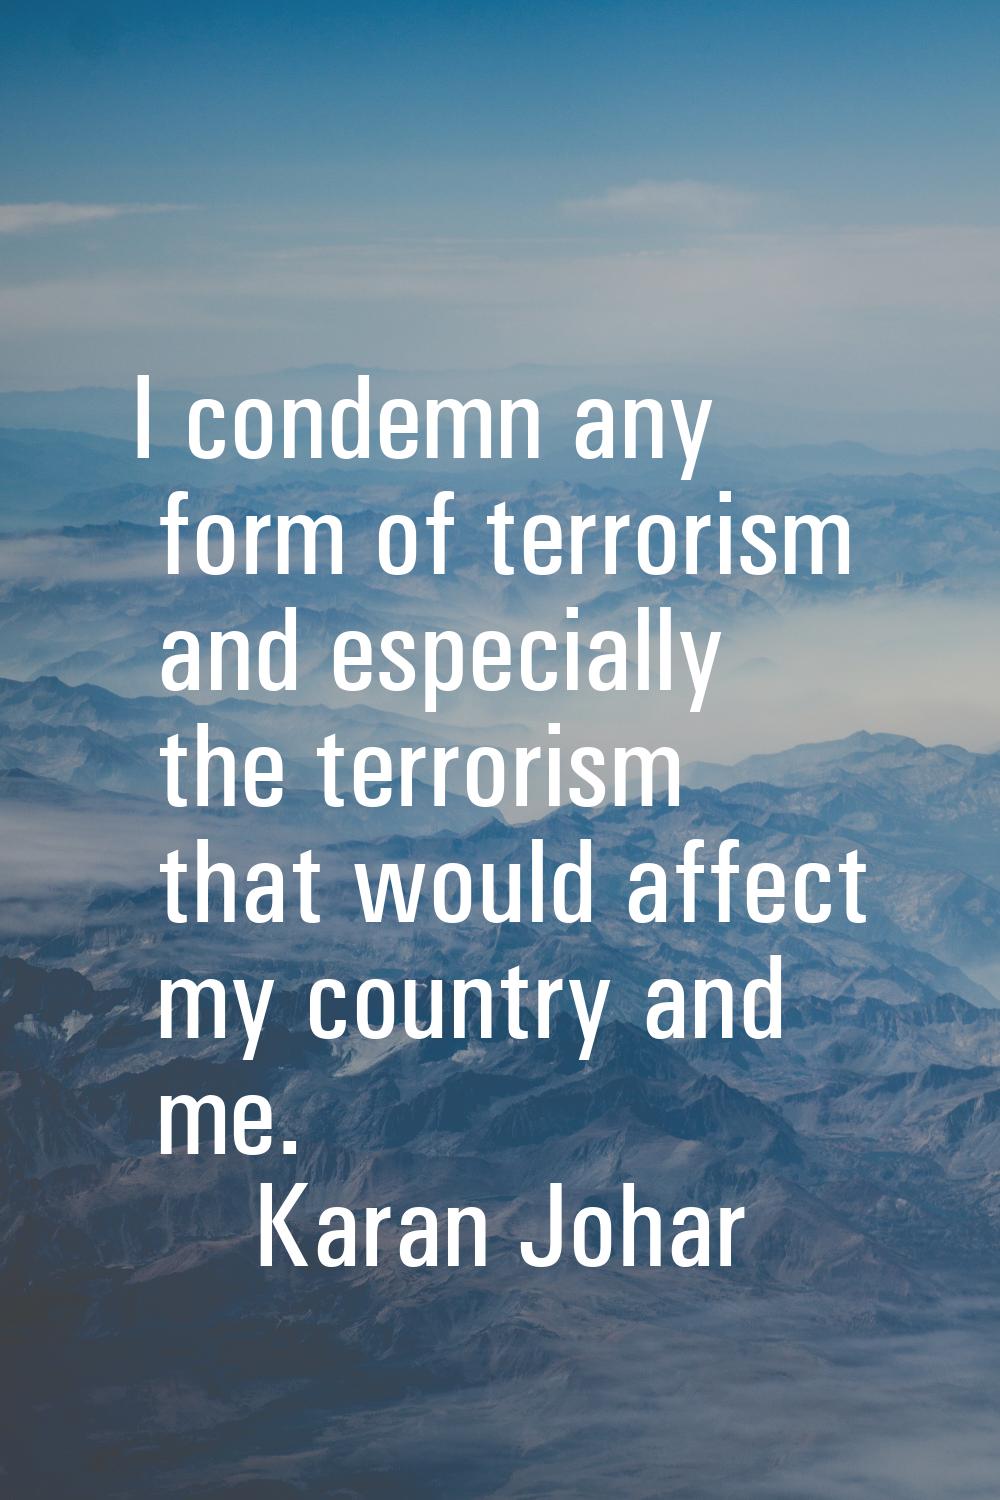 I condemn any form of terrorism and especially the terrorism that would affect my country and me.